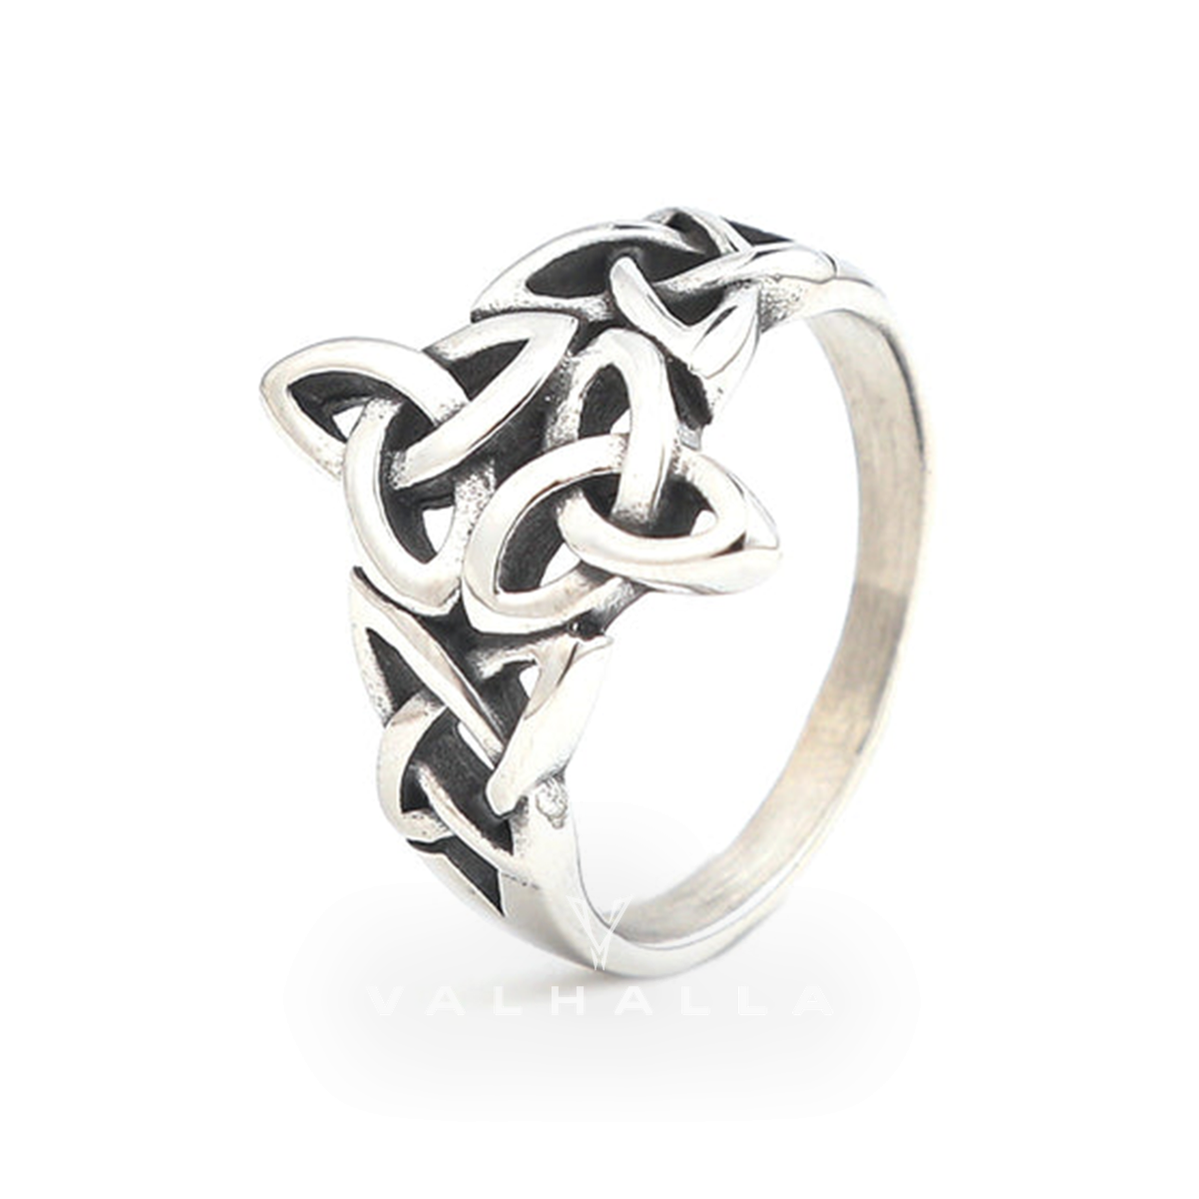 Handcrafted Stainless Steel Triquetra and Celtic Knot Ring